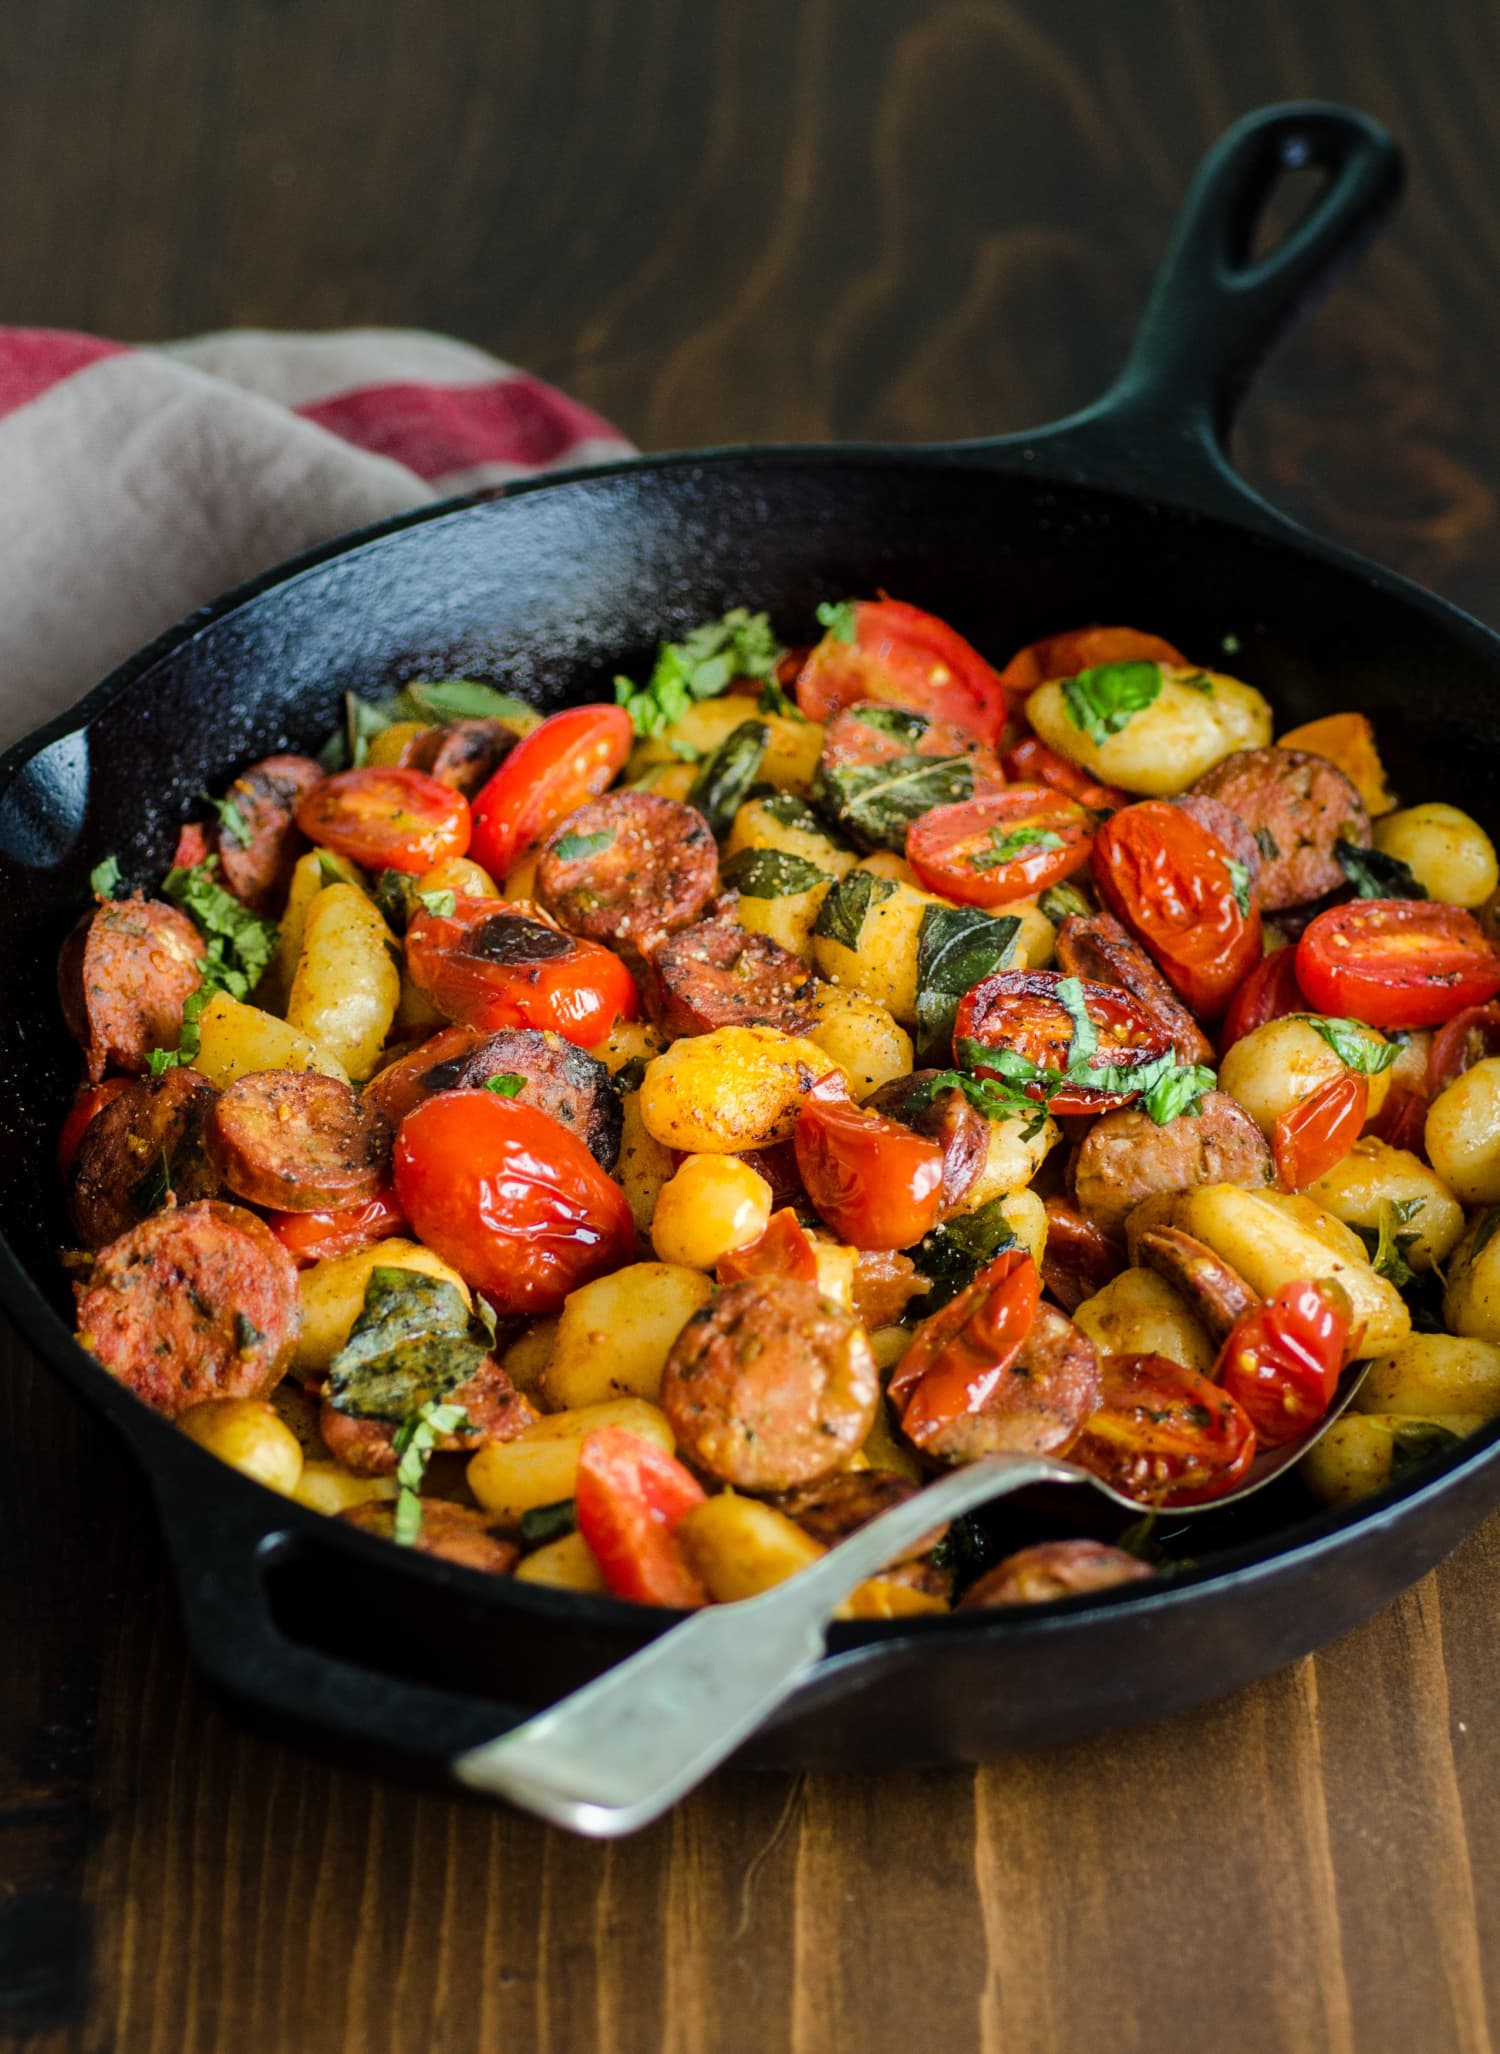 Why the Cast Iron Skillet Is the Key to Better One-Pan Cooking